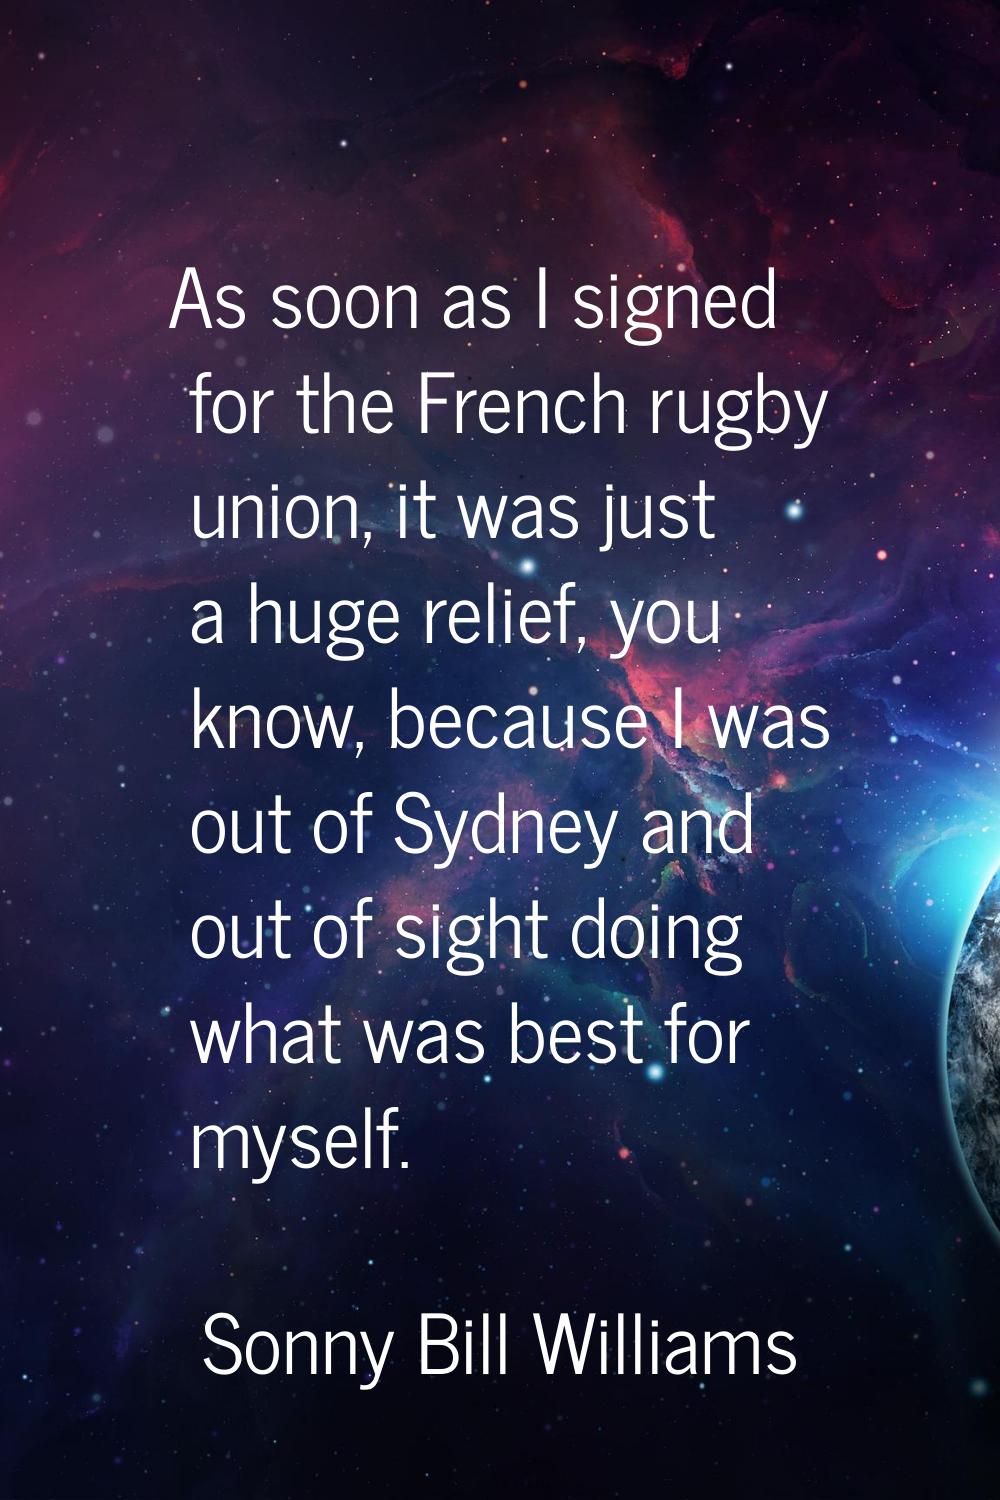 As soon as I signed for the French rugby union, it was just a huge relief, you know, because I was 